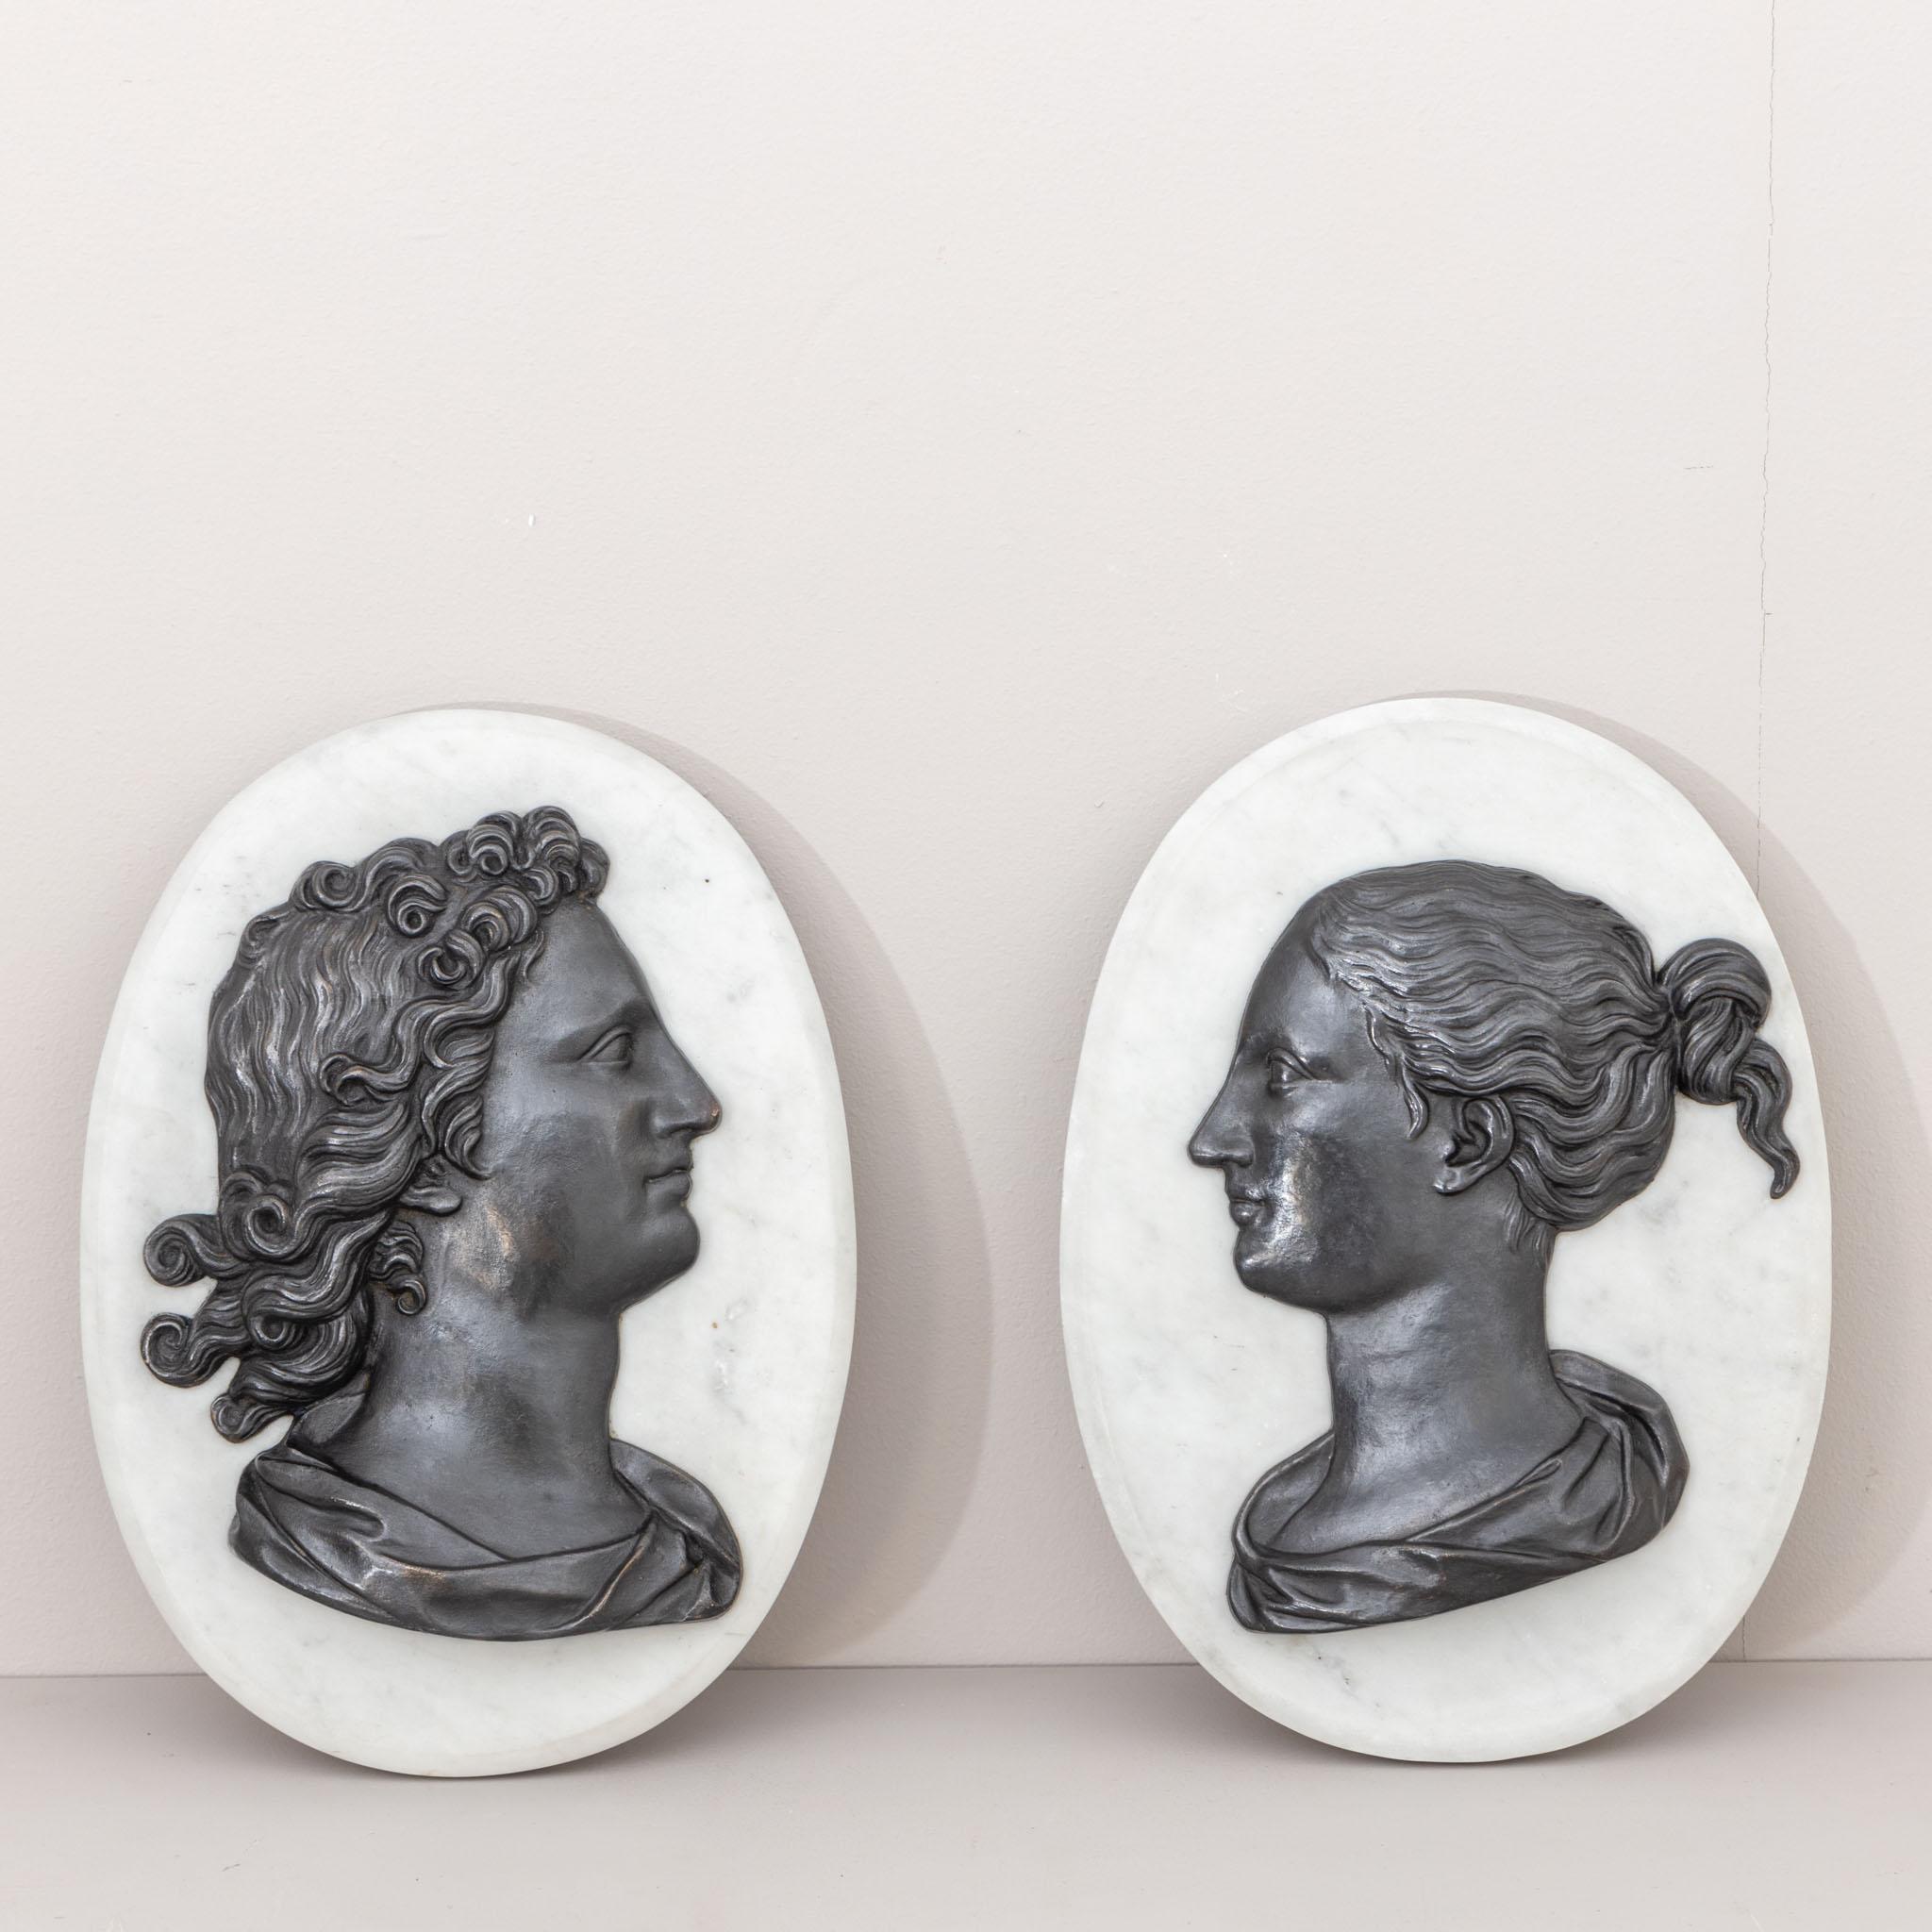 Pair of bas-reliefs with antique profile portraits in bronze mounted on an oval marble disc.